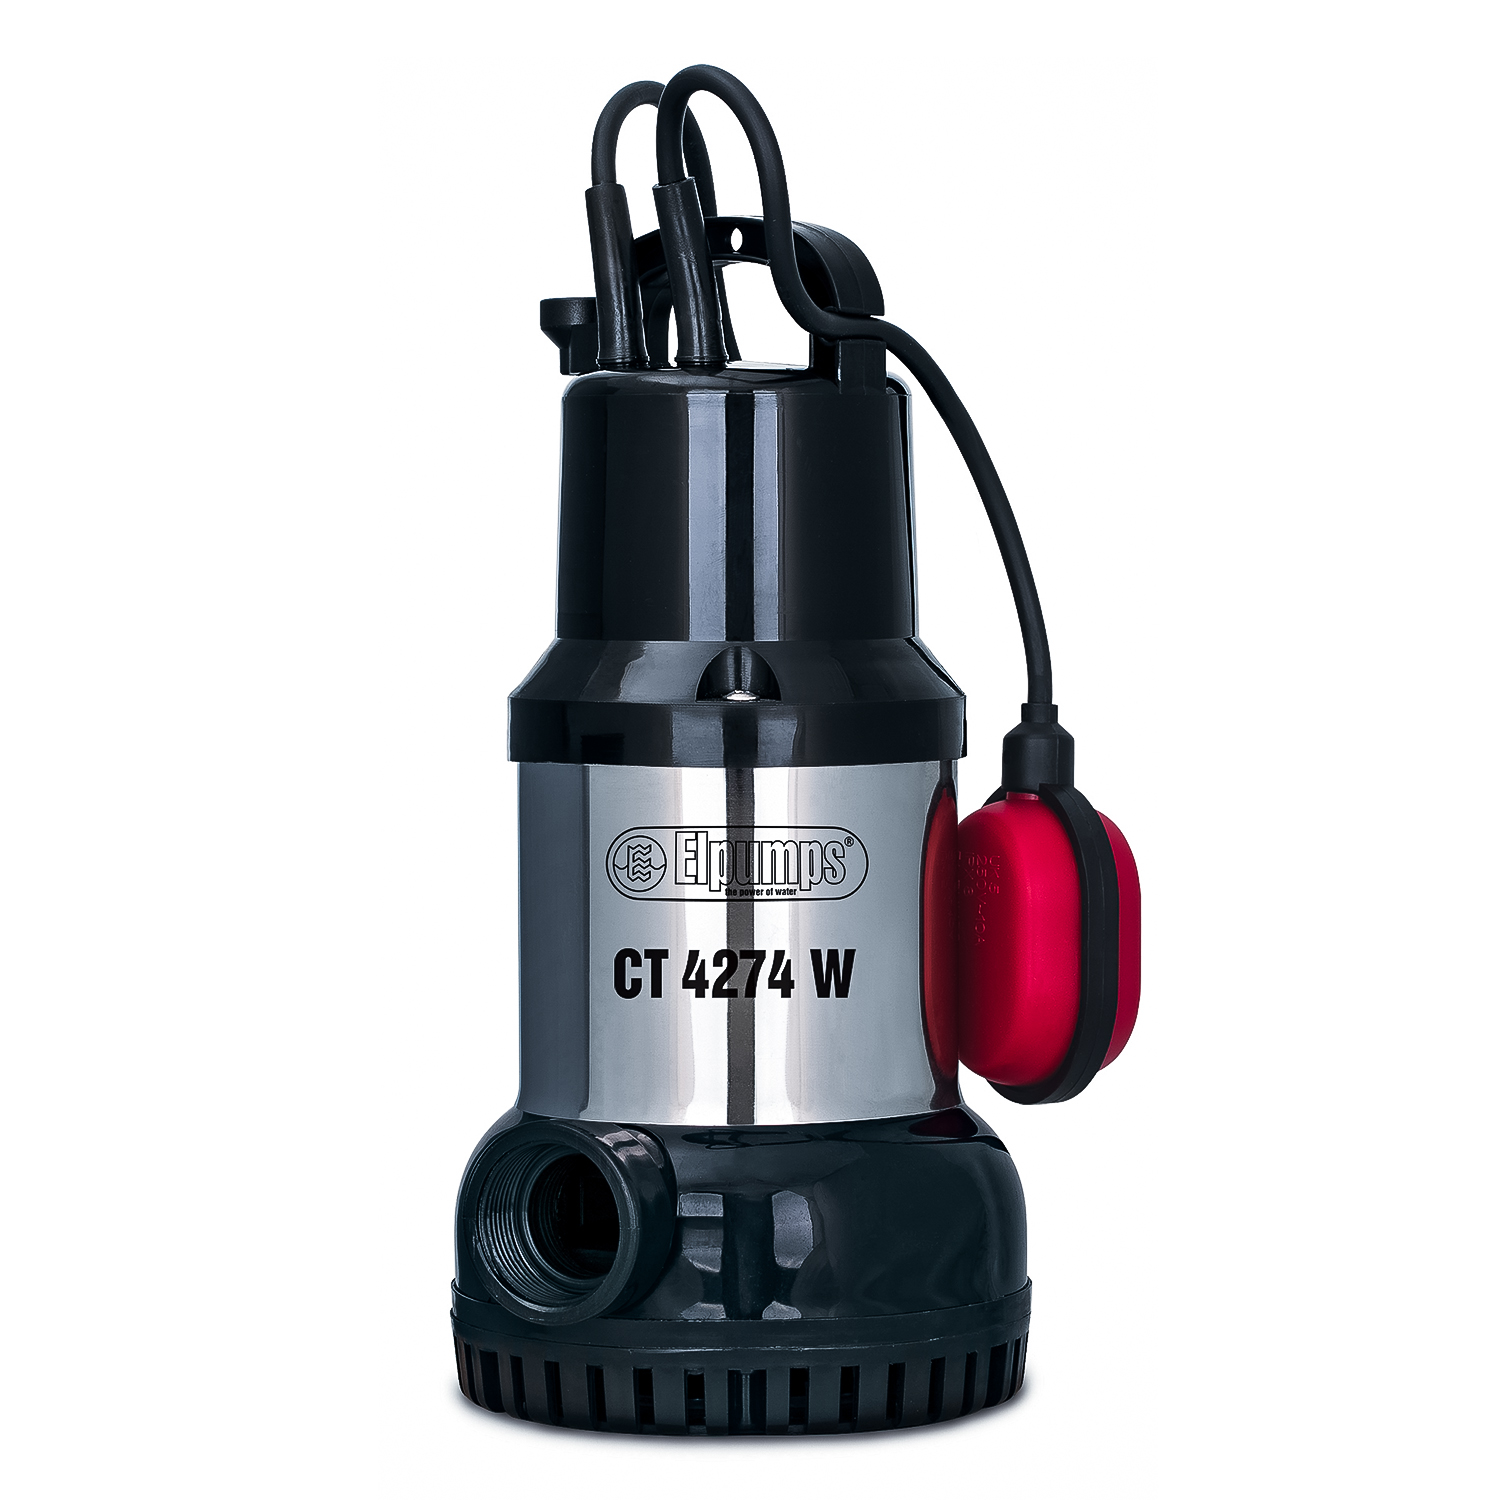 CT 4274 W Submersible pumps for clean and dirty water